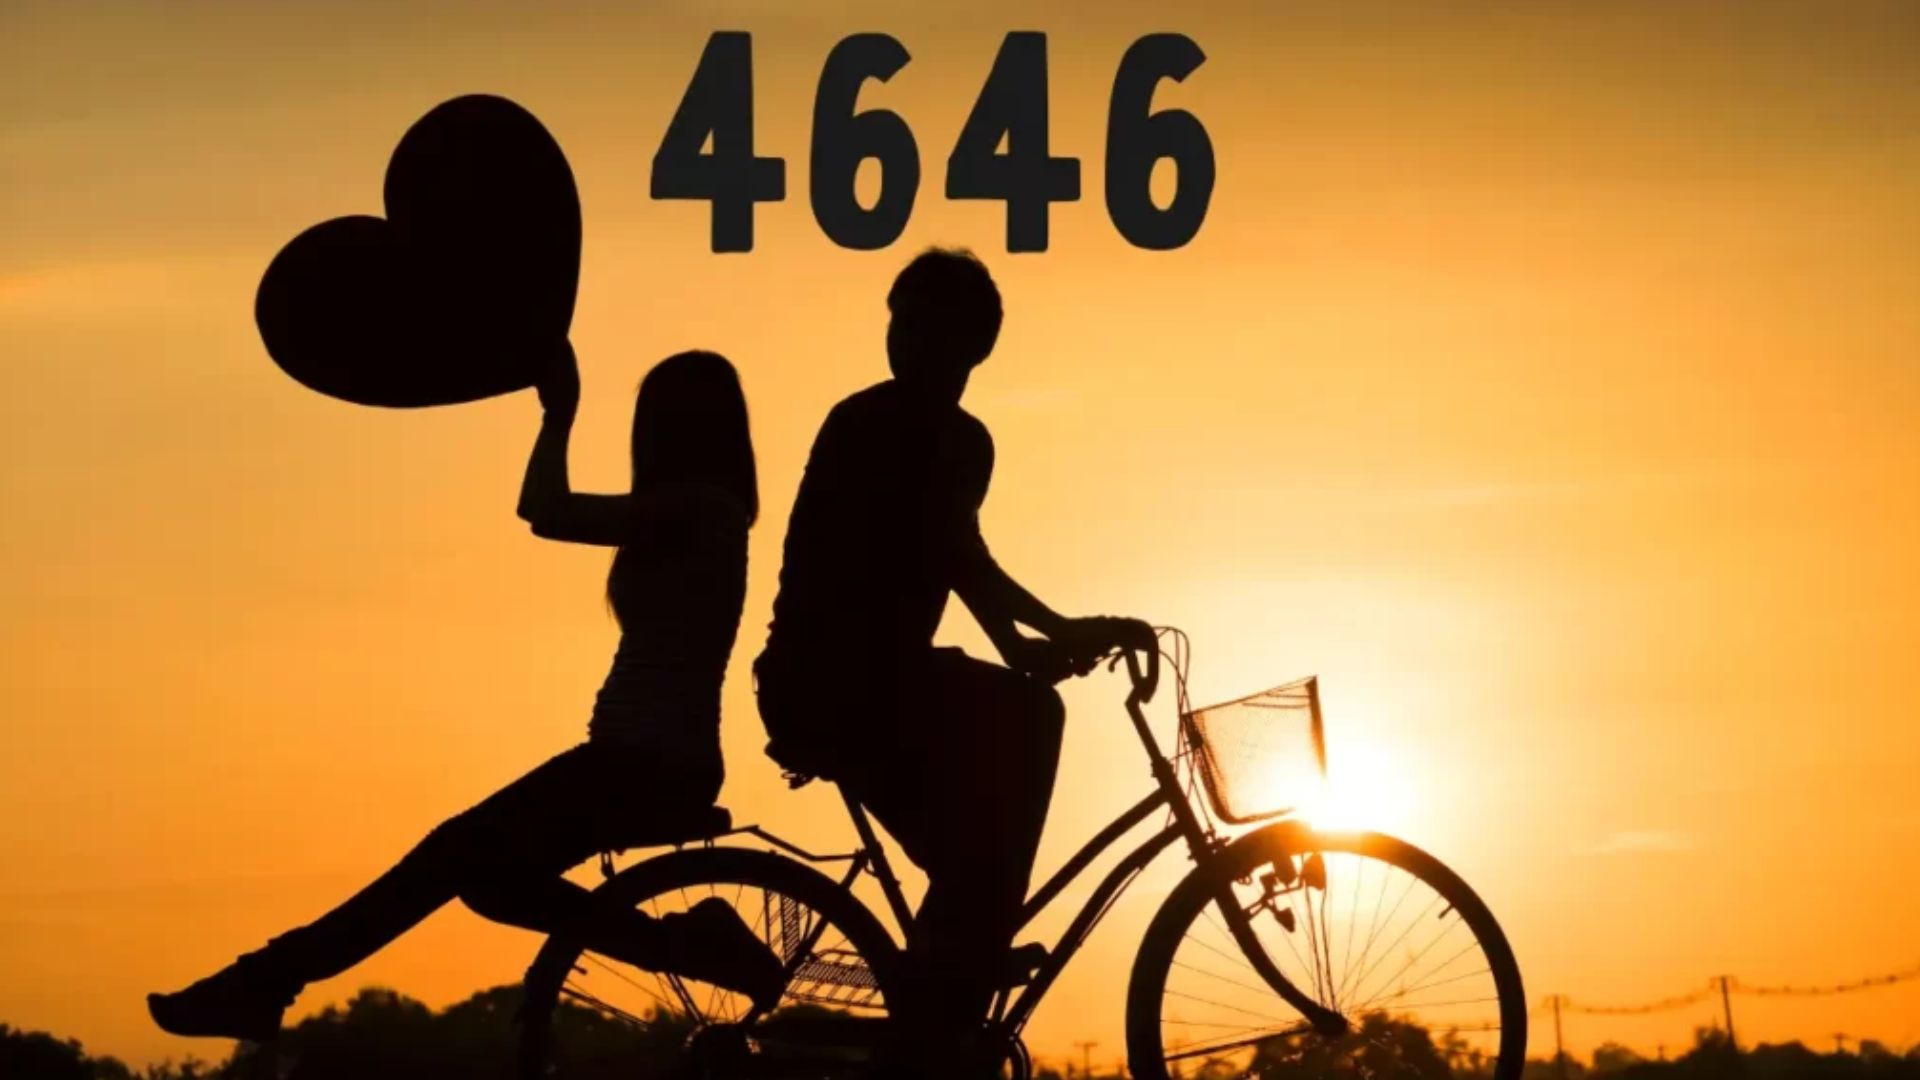 What Does The 4646 Angel Number Twin Flame Mean For You?